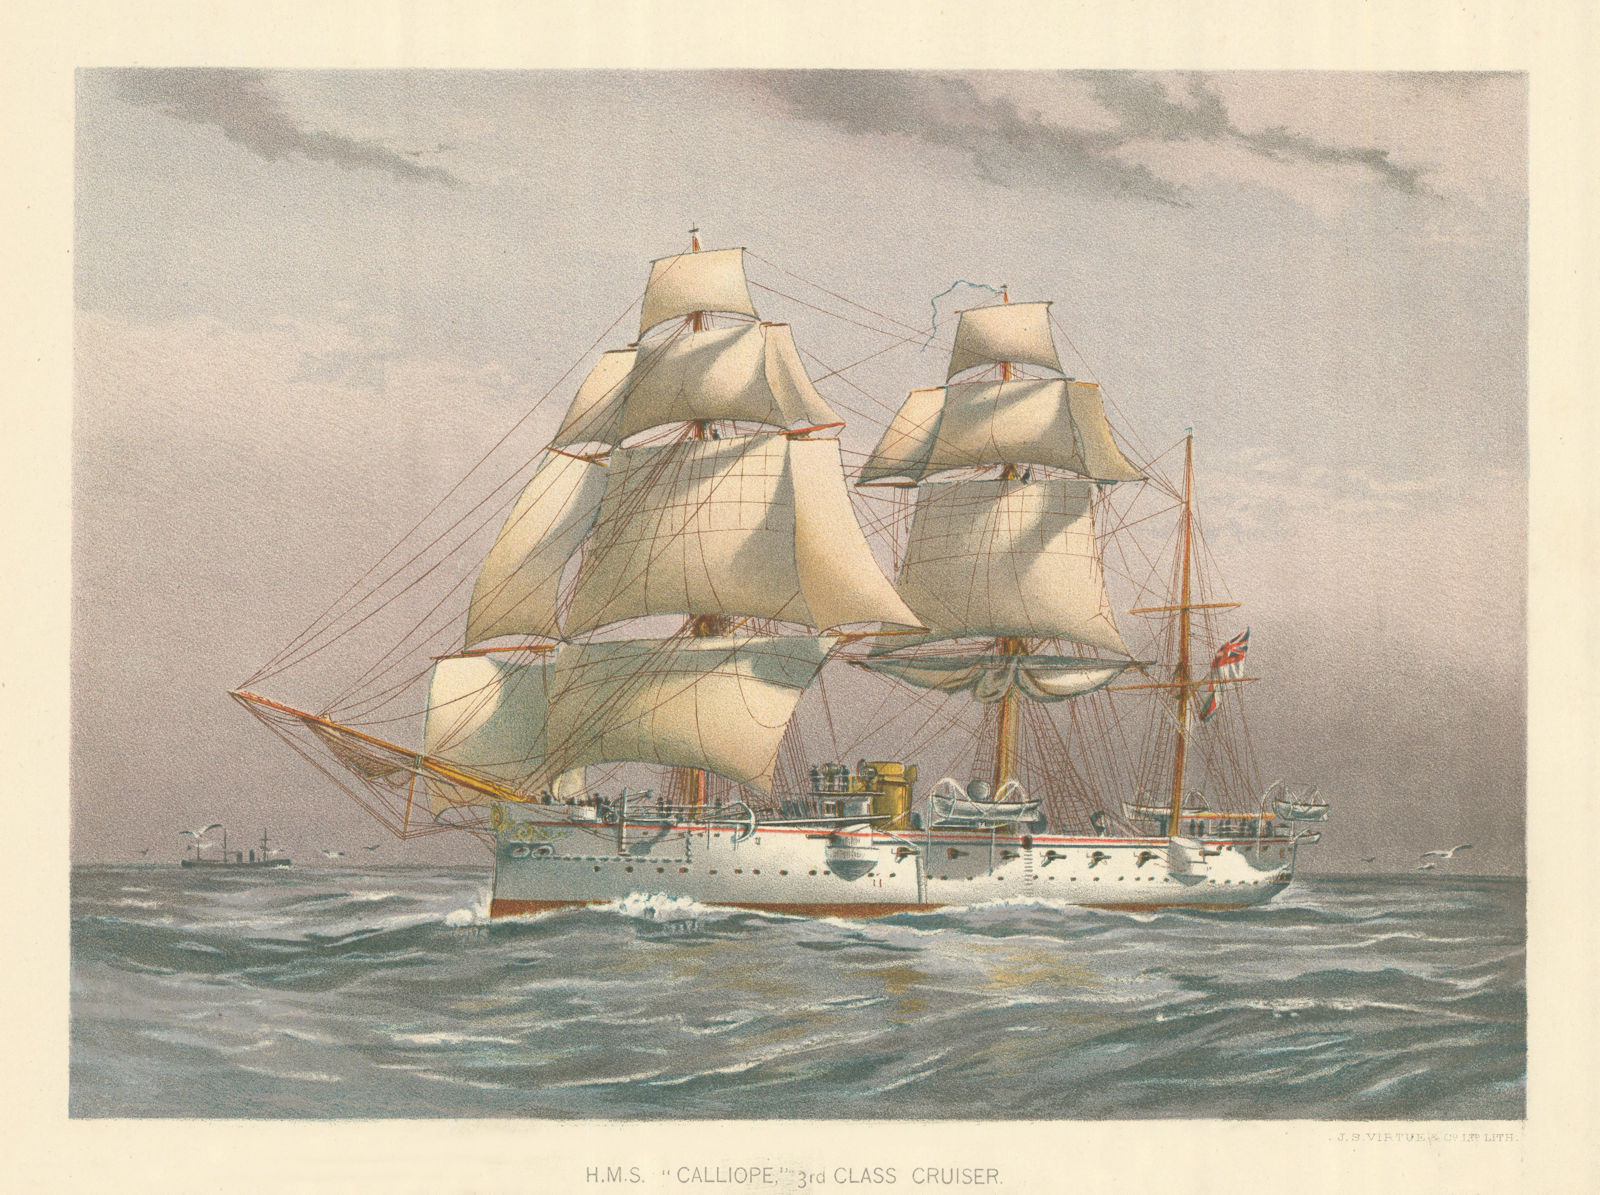 Associate Product H.M.S. "Calliope" - 3rd class cruiser (1884) by W.F. Mitchell. Royal Navy 1893